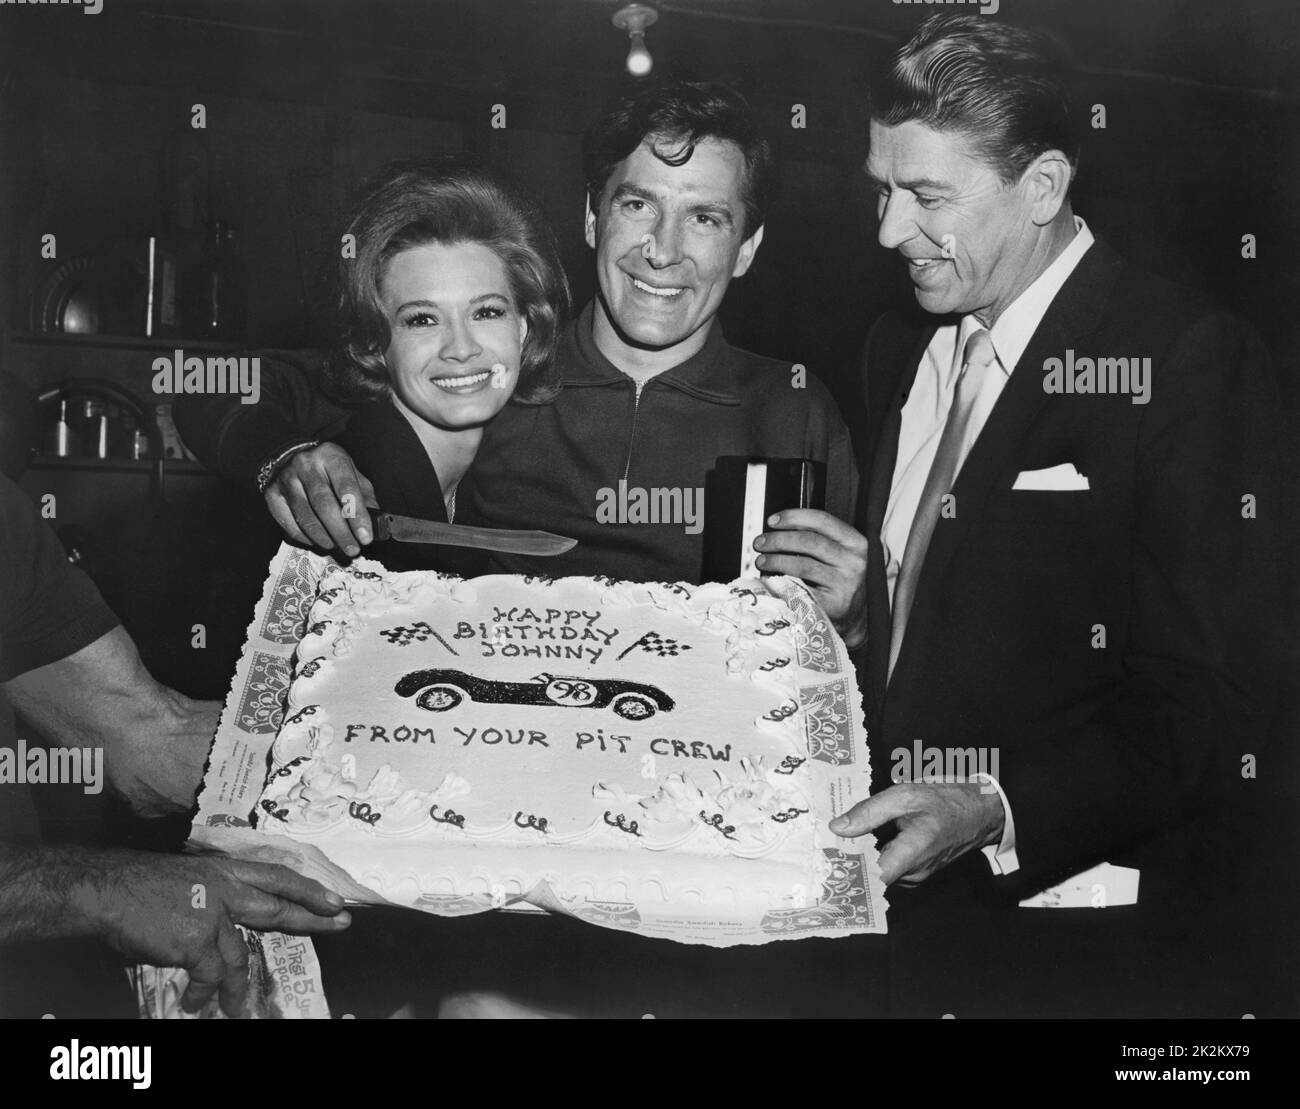 The film crew gives a suprise birthday cake to the director. Angie Dickinson, John Cassavetes and Ronald Reagan around the cake. Film: The Killers, USA, 1964 Stock Photo